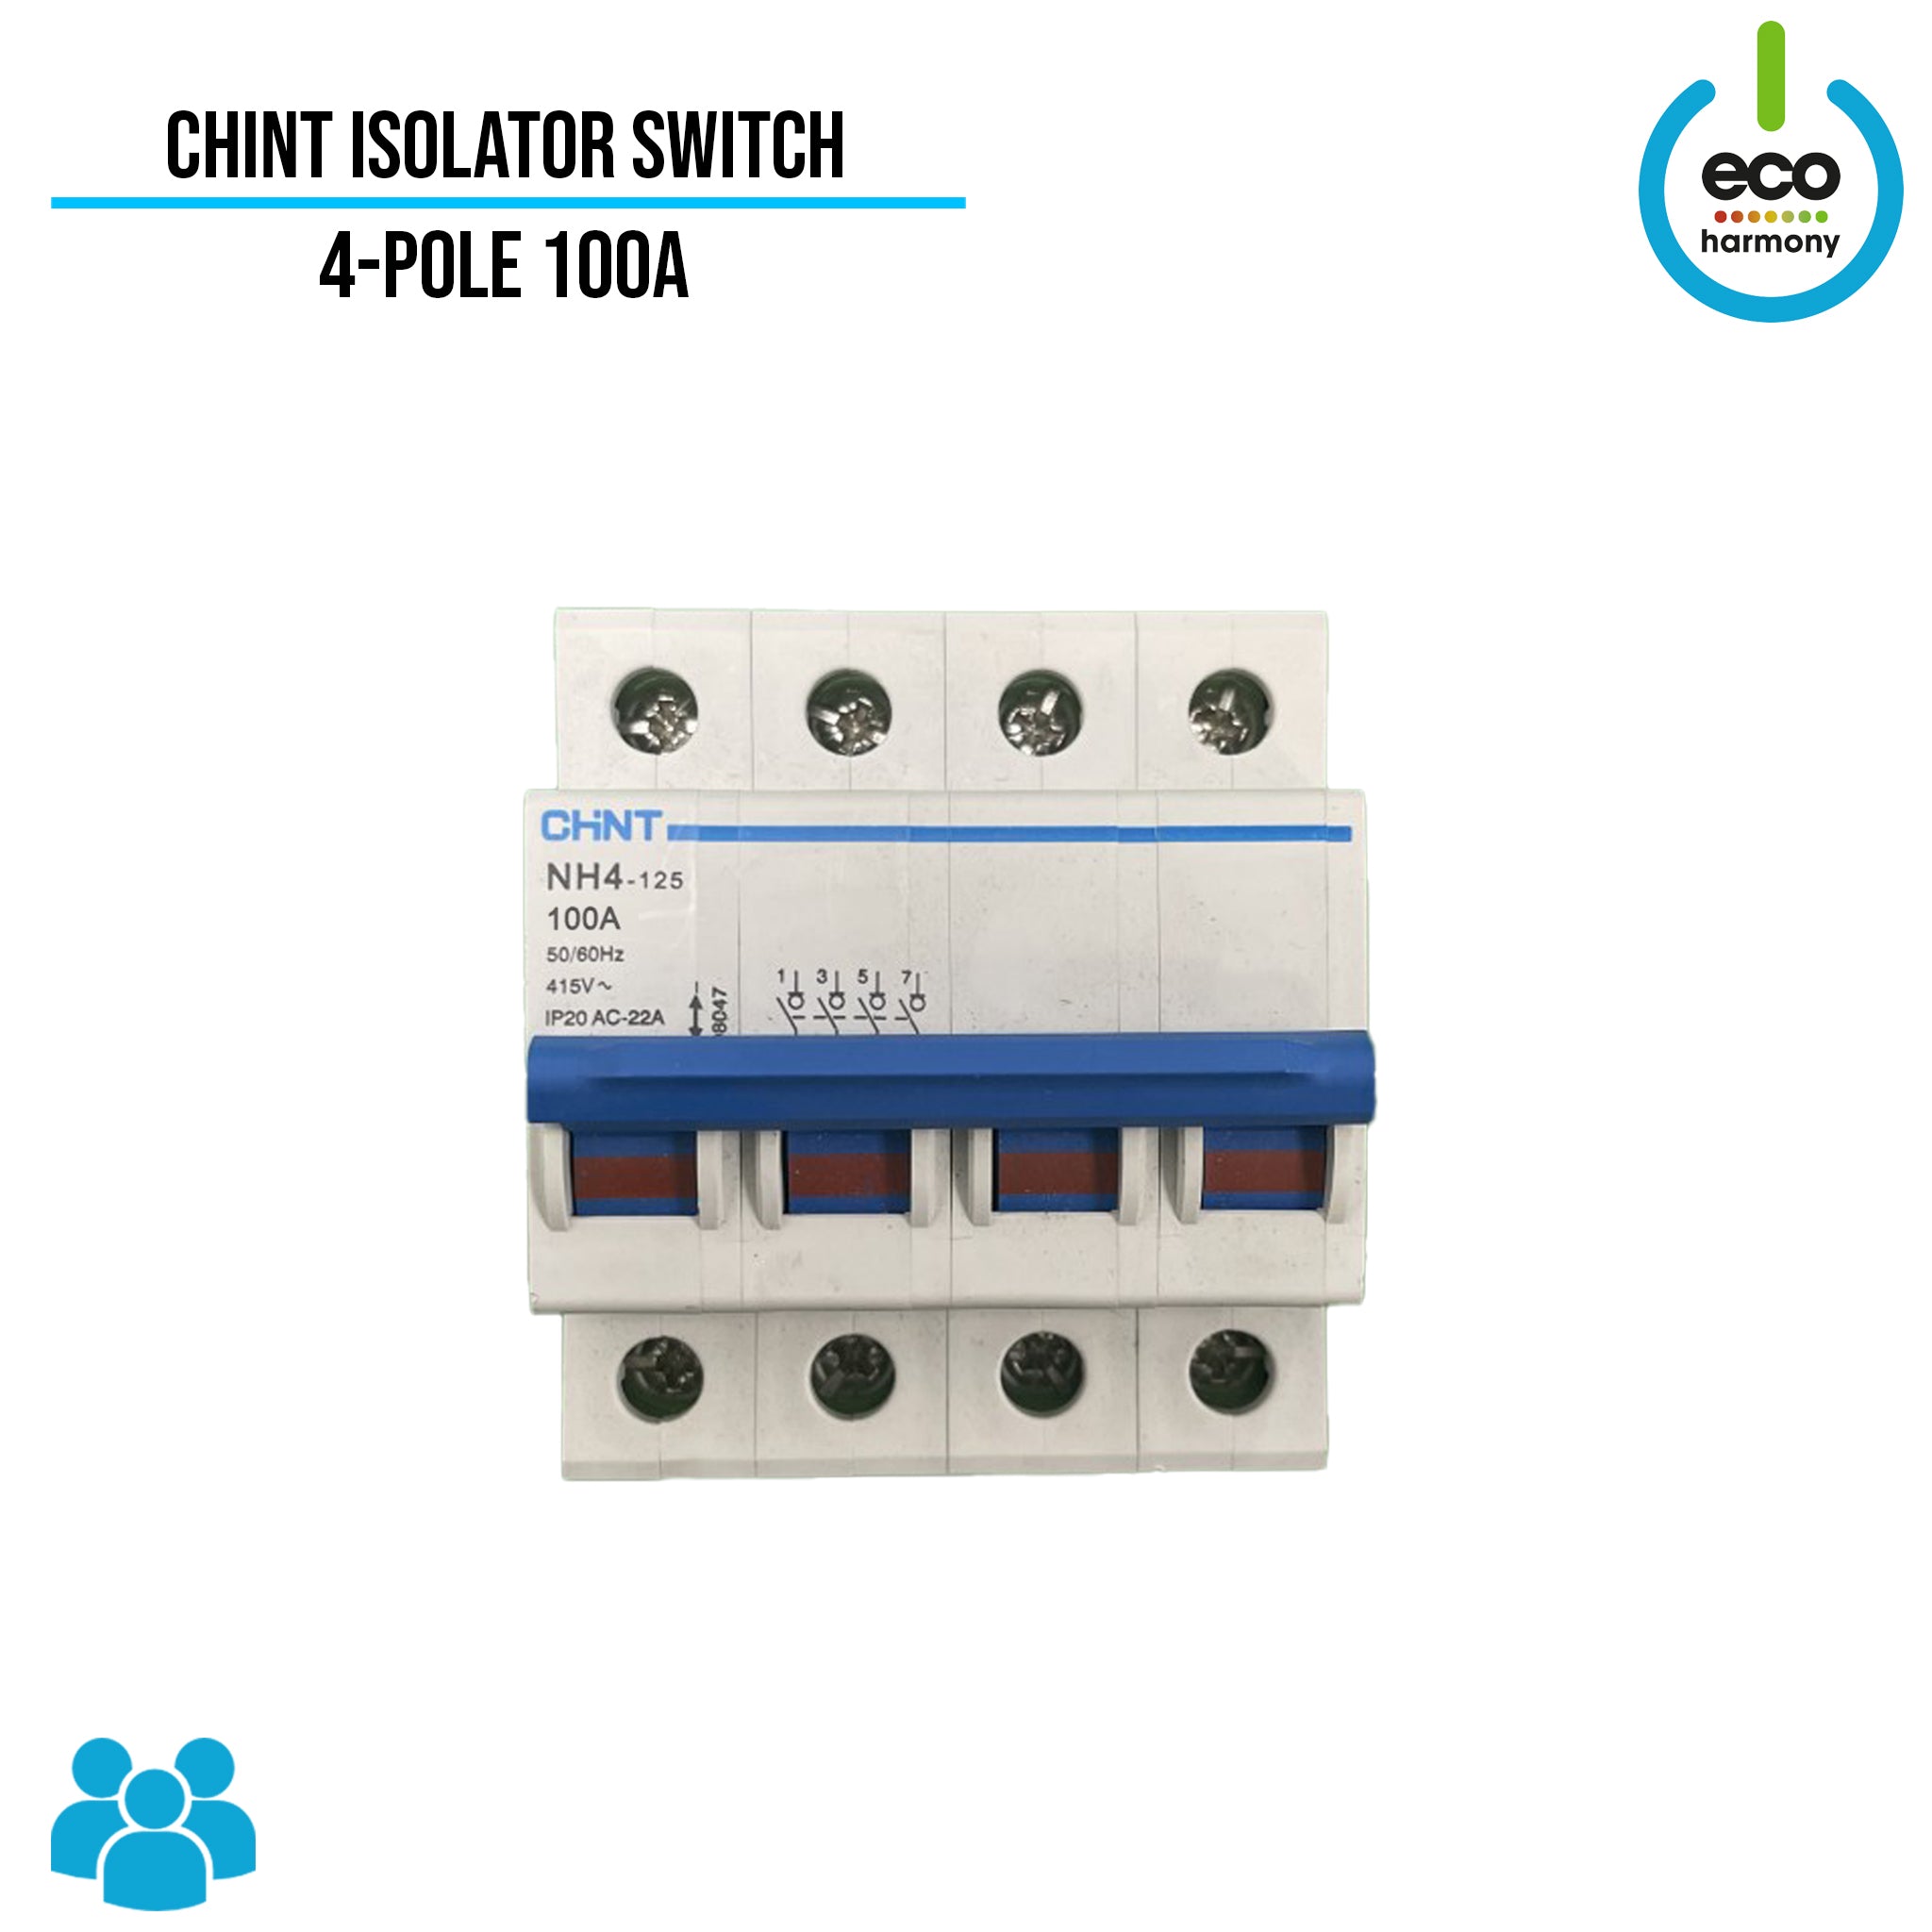 Chint 100A 4-Pole Isolator Switch